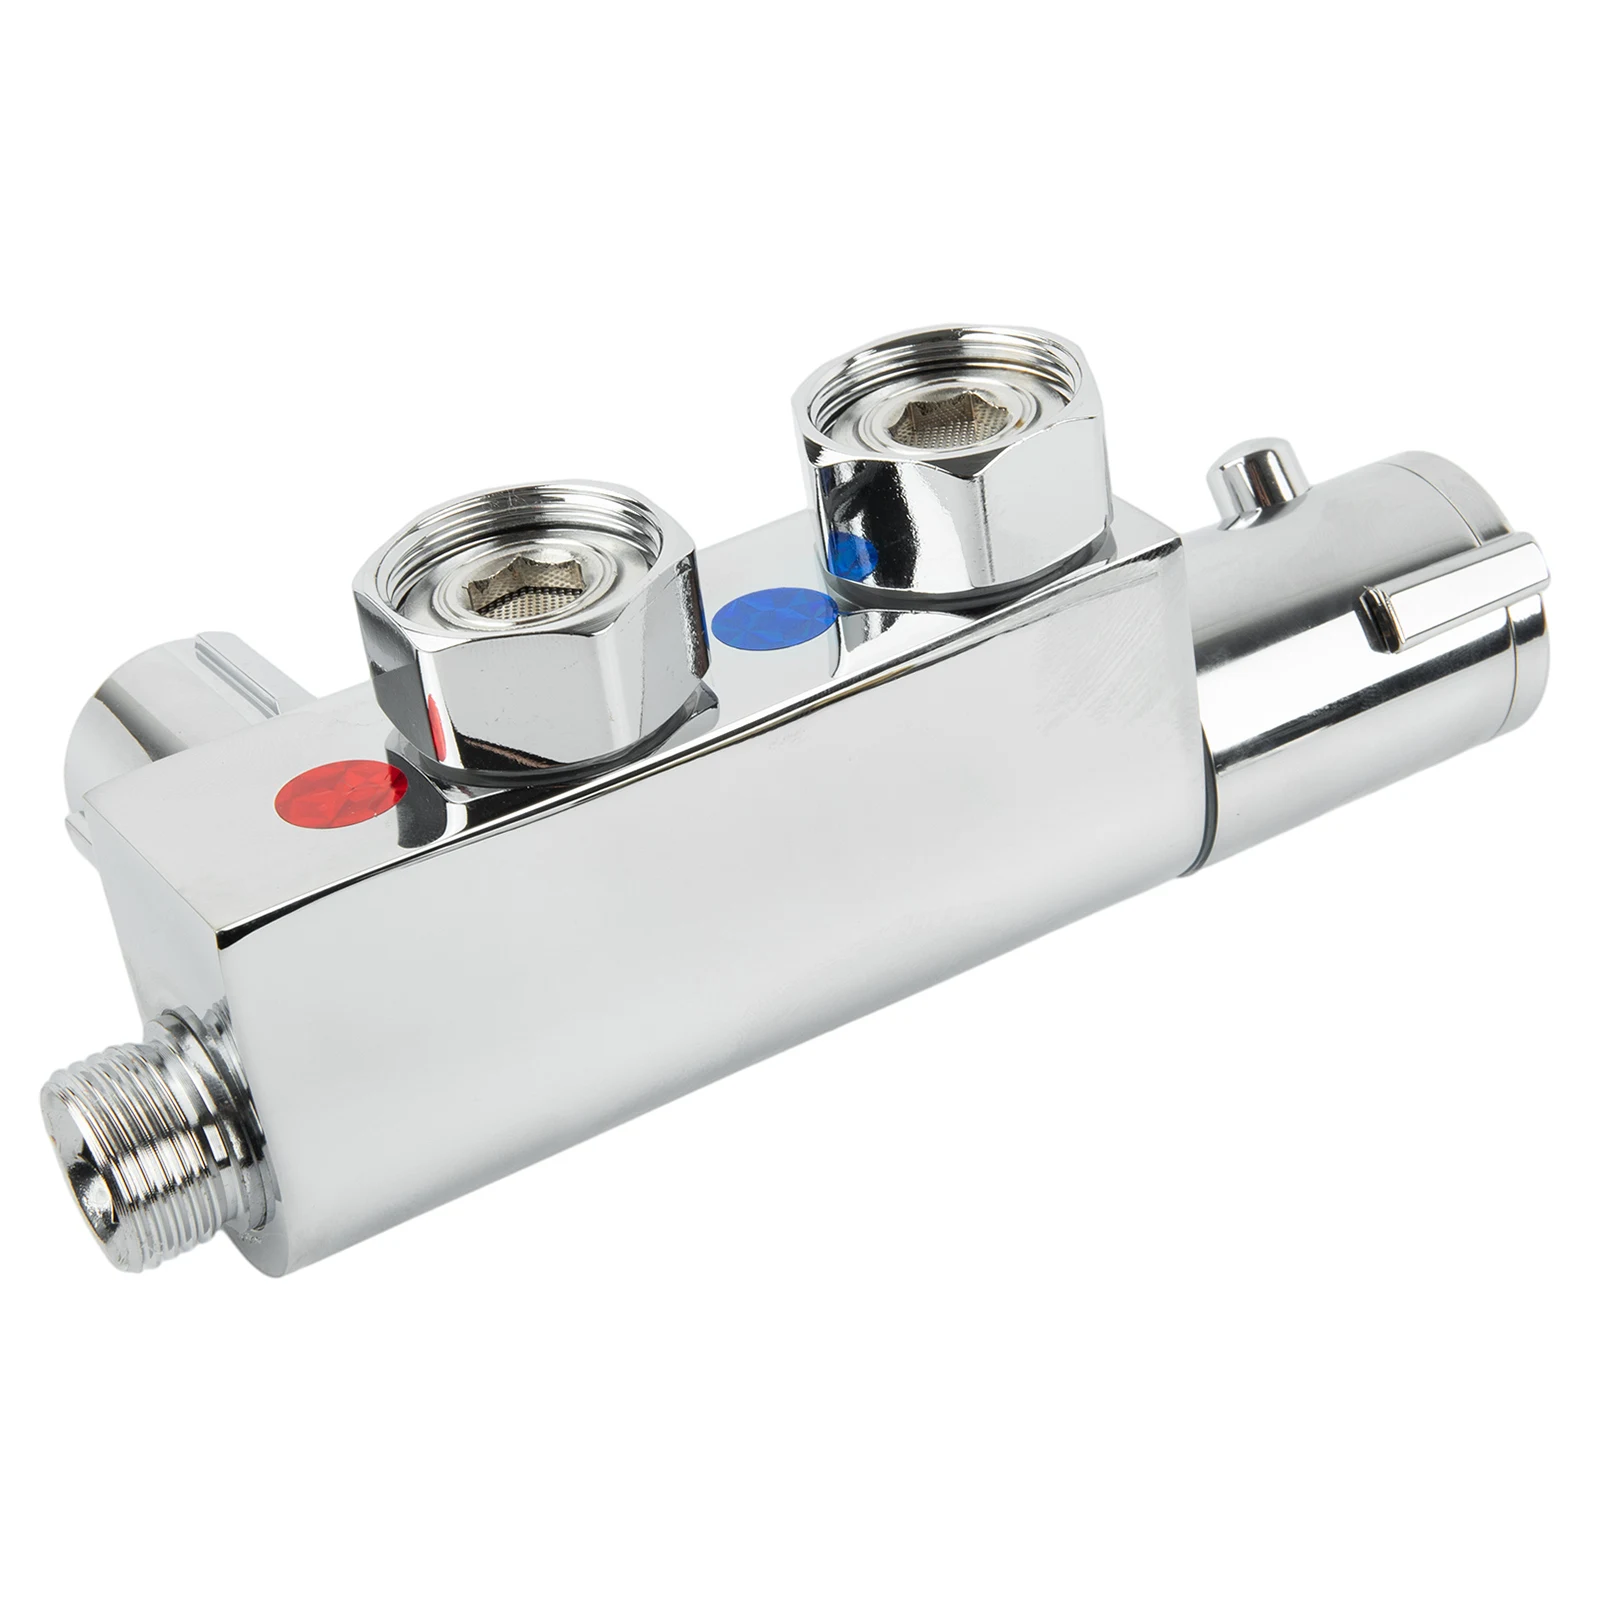 

Bath Supplies Shower Mixer Valve 1/2\\\" Hot Cold Connectors Controlled Temperature For High Low Pressure System